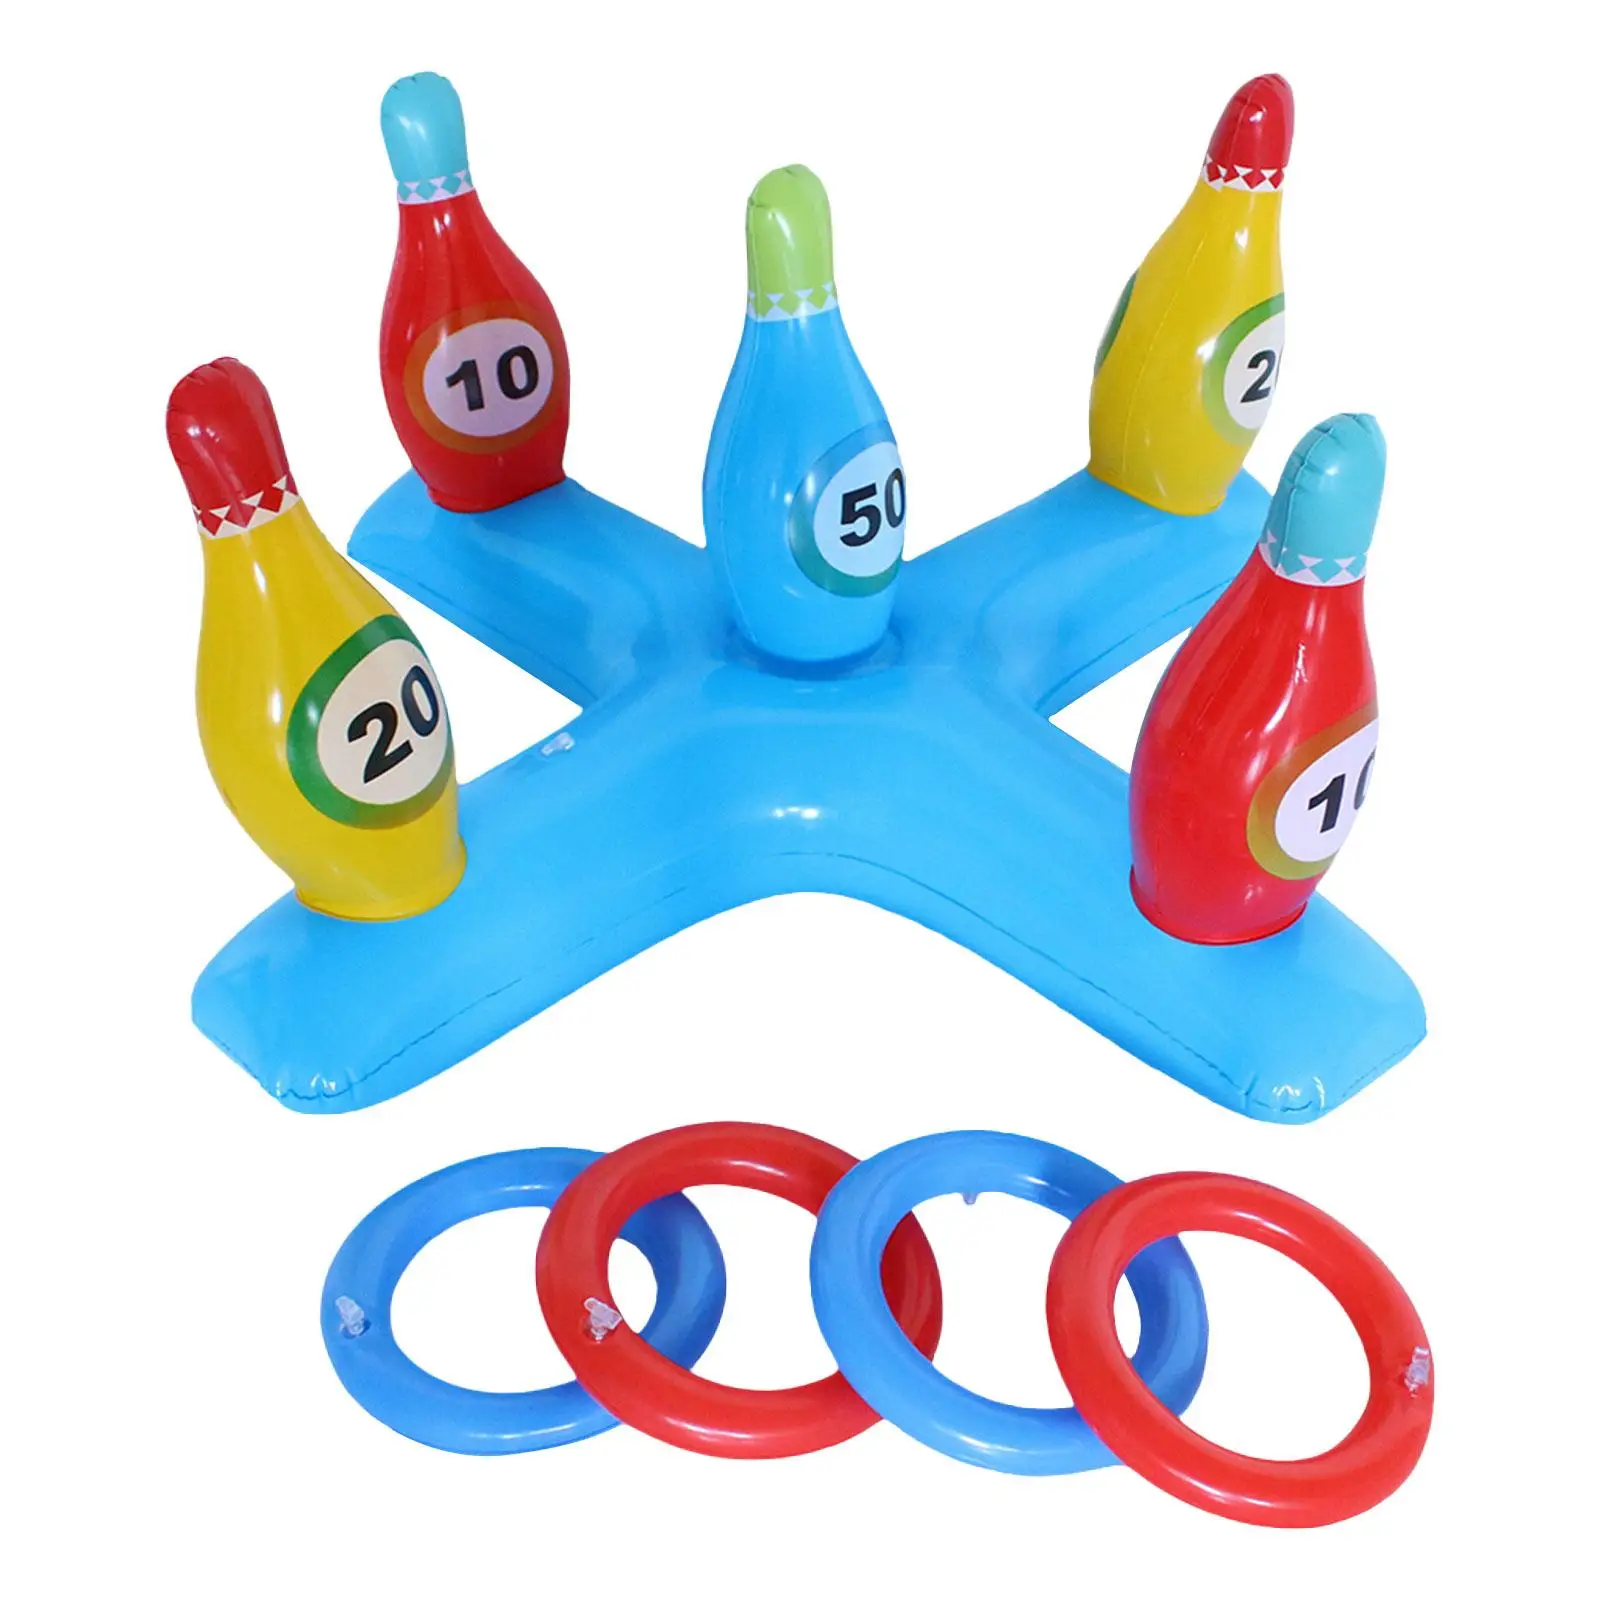 Ring Toss Game Set Durable Colorful Family Fun Activities Carnival Outdoor Games for Activity Xmas Carnival Backyard Adults